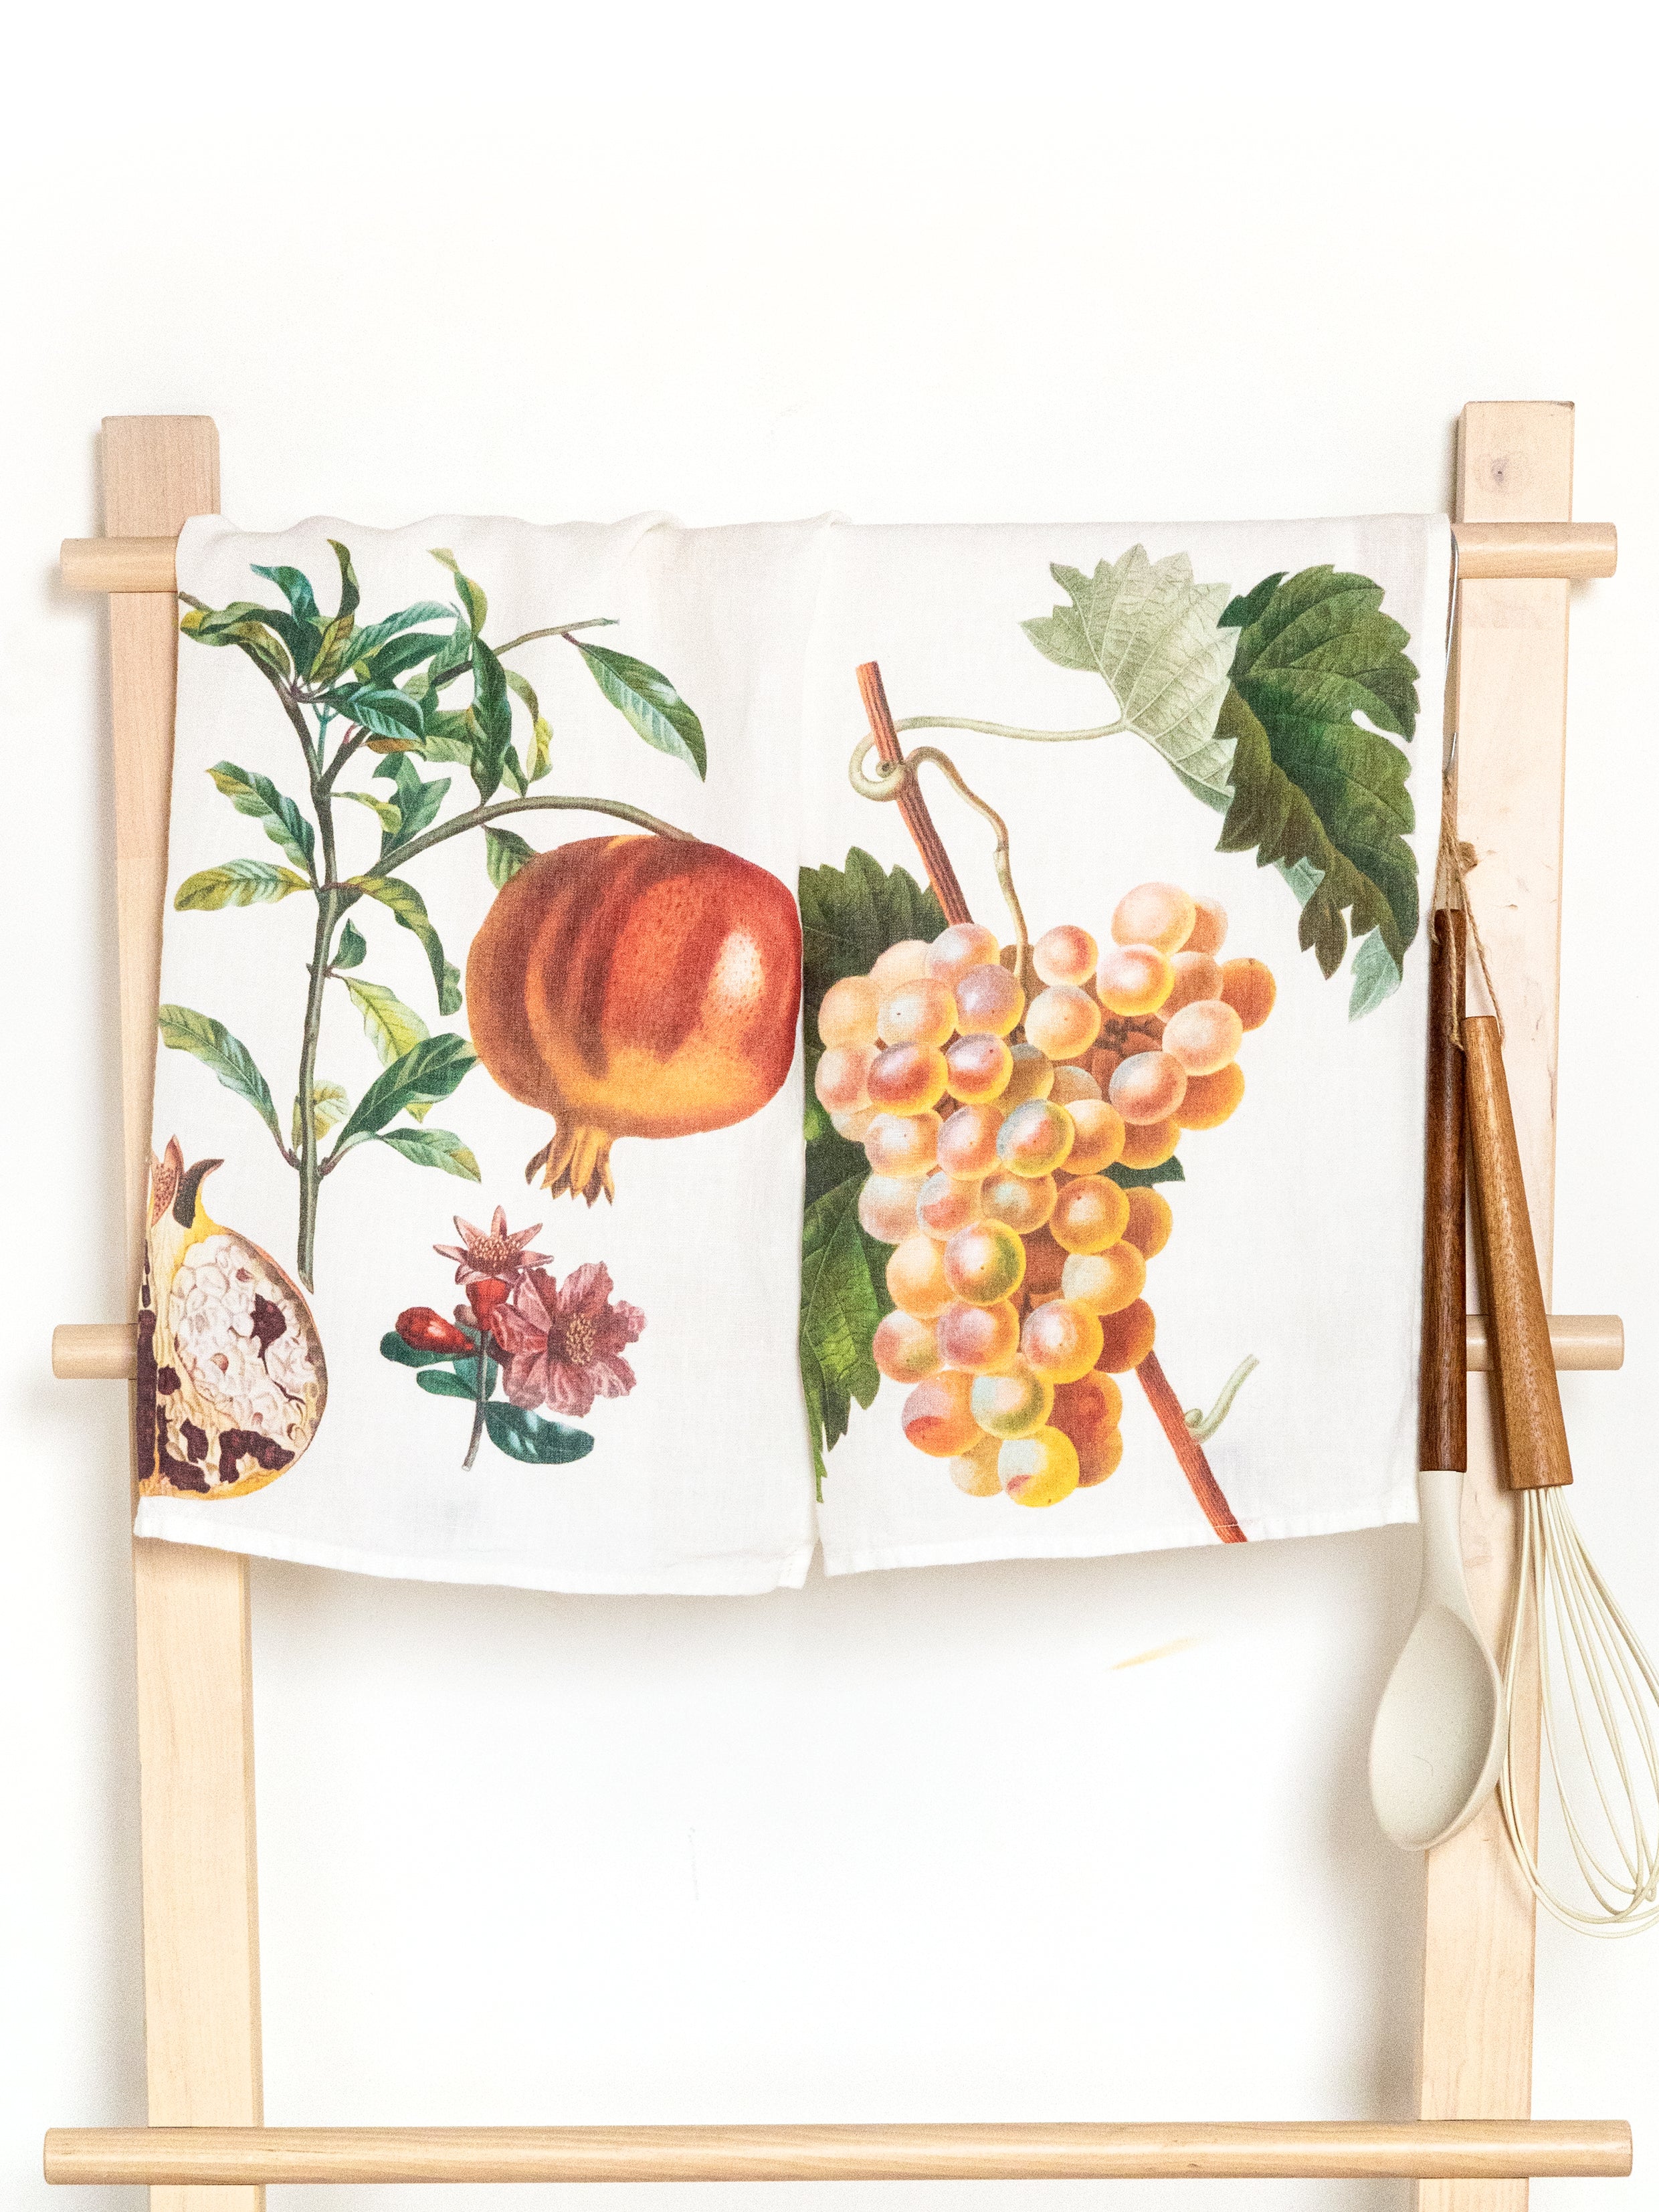 The Linoroom “Grape & Pomegranate,” Pair of linen printed tea towels.